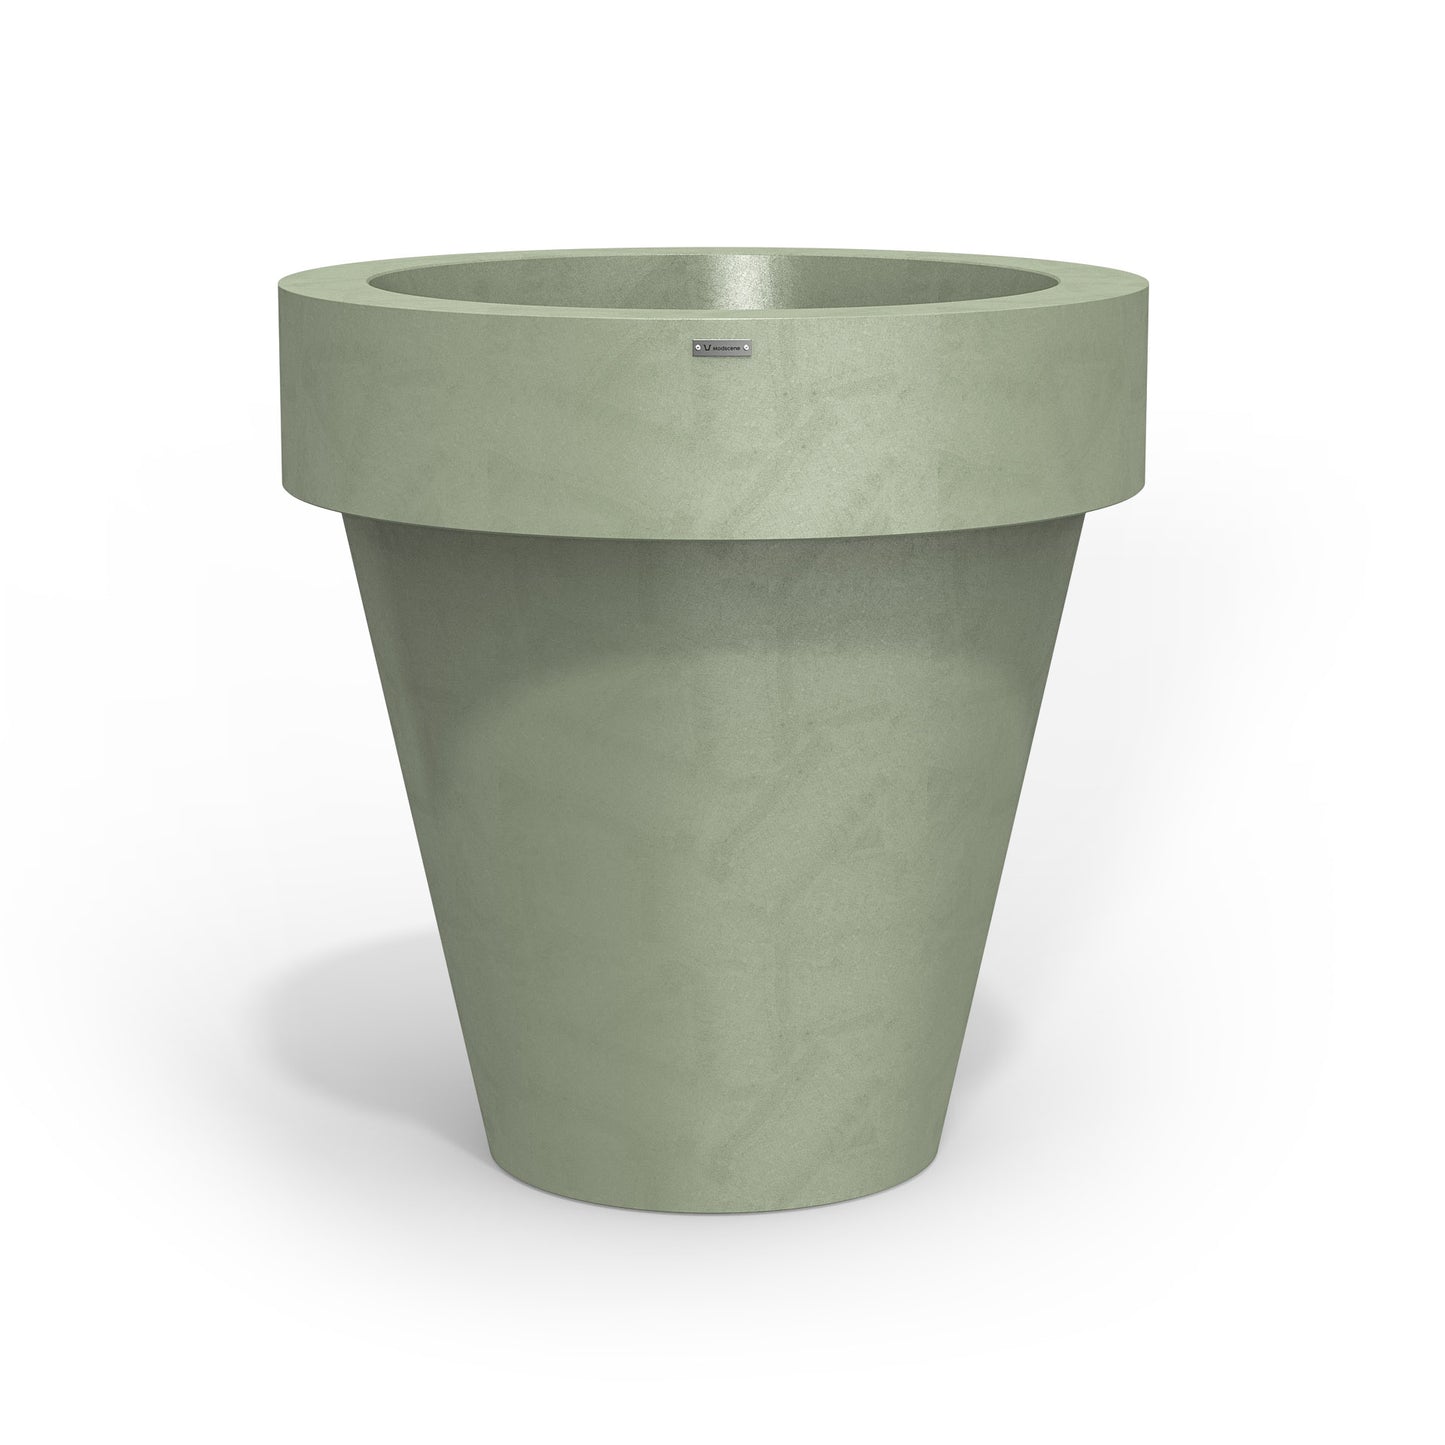 Extra large Modscene planter pot in a pastel green colour and concrete finish.